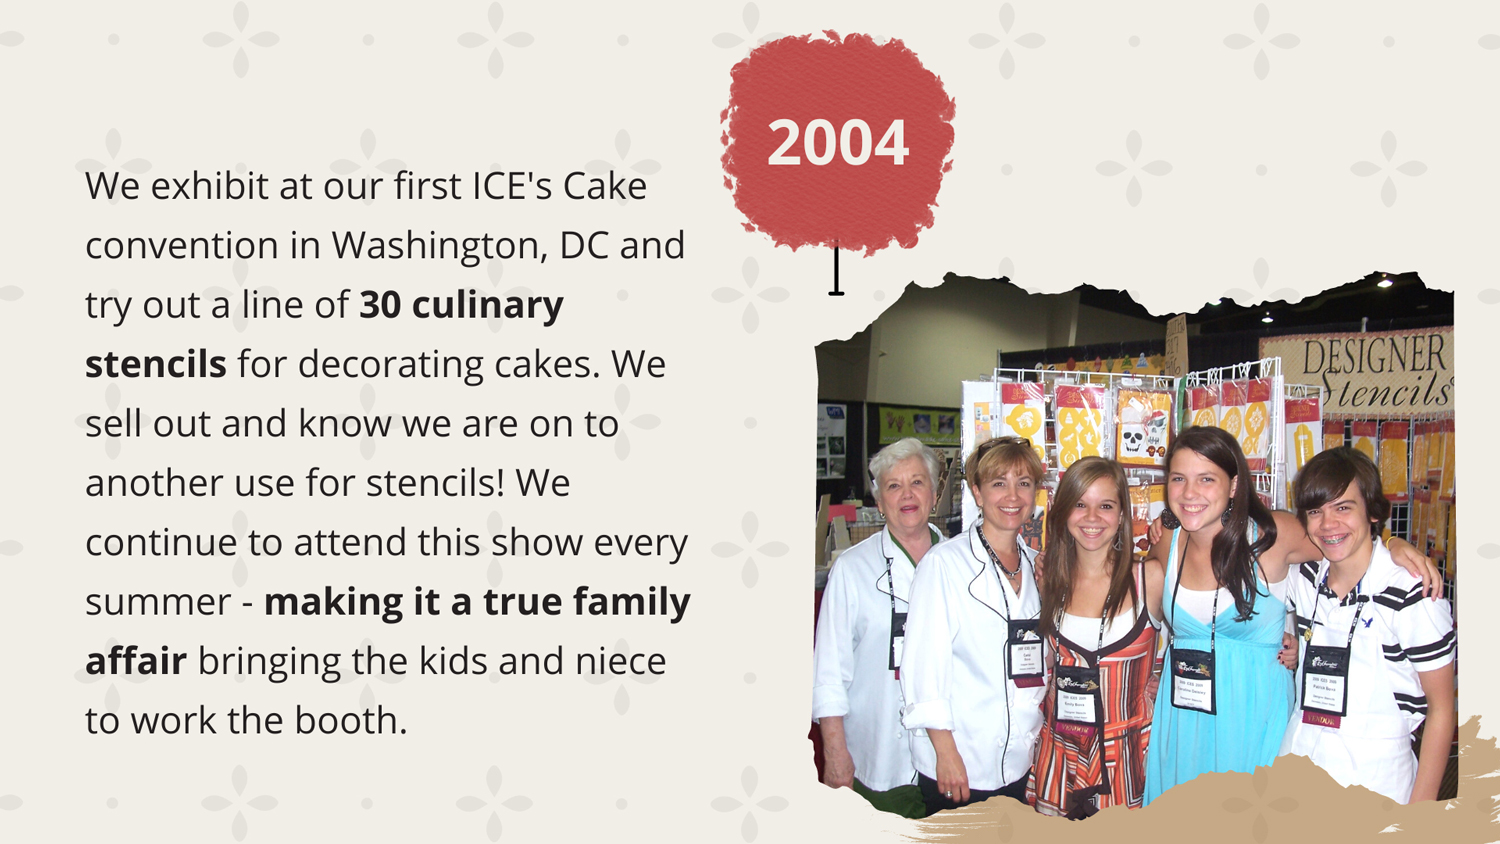 2004 - We exhibit at our first ICE's Cake convention in Washington, DC and try out a line of 30 culinary stencils for decorating cakes. We sell out and know we are on to another use for stencils! We continue to attend this show every summer - making it a true family affair bringing the kids and niece along to work the booth.